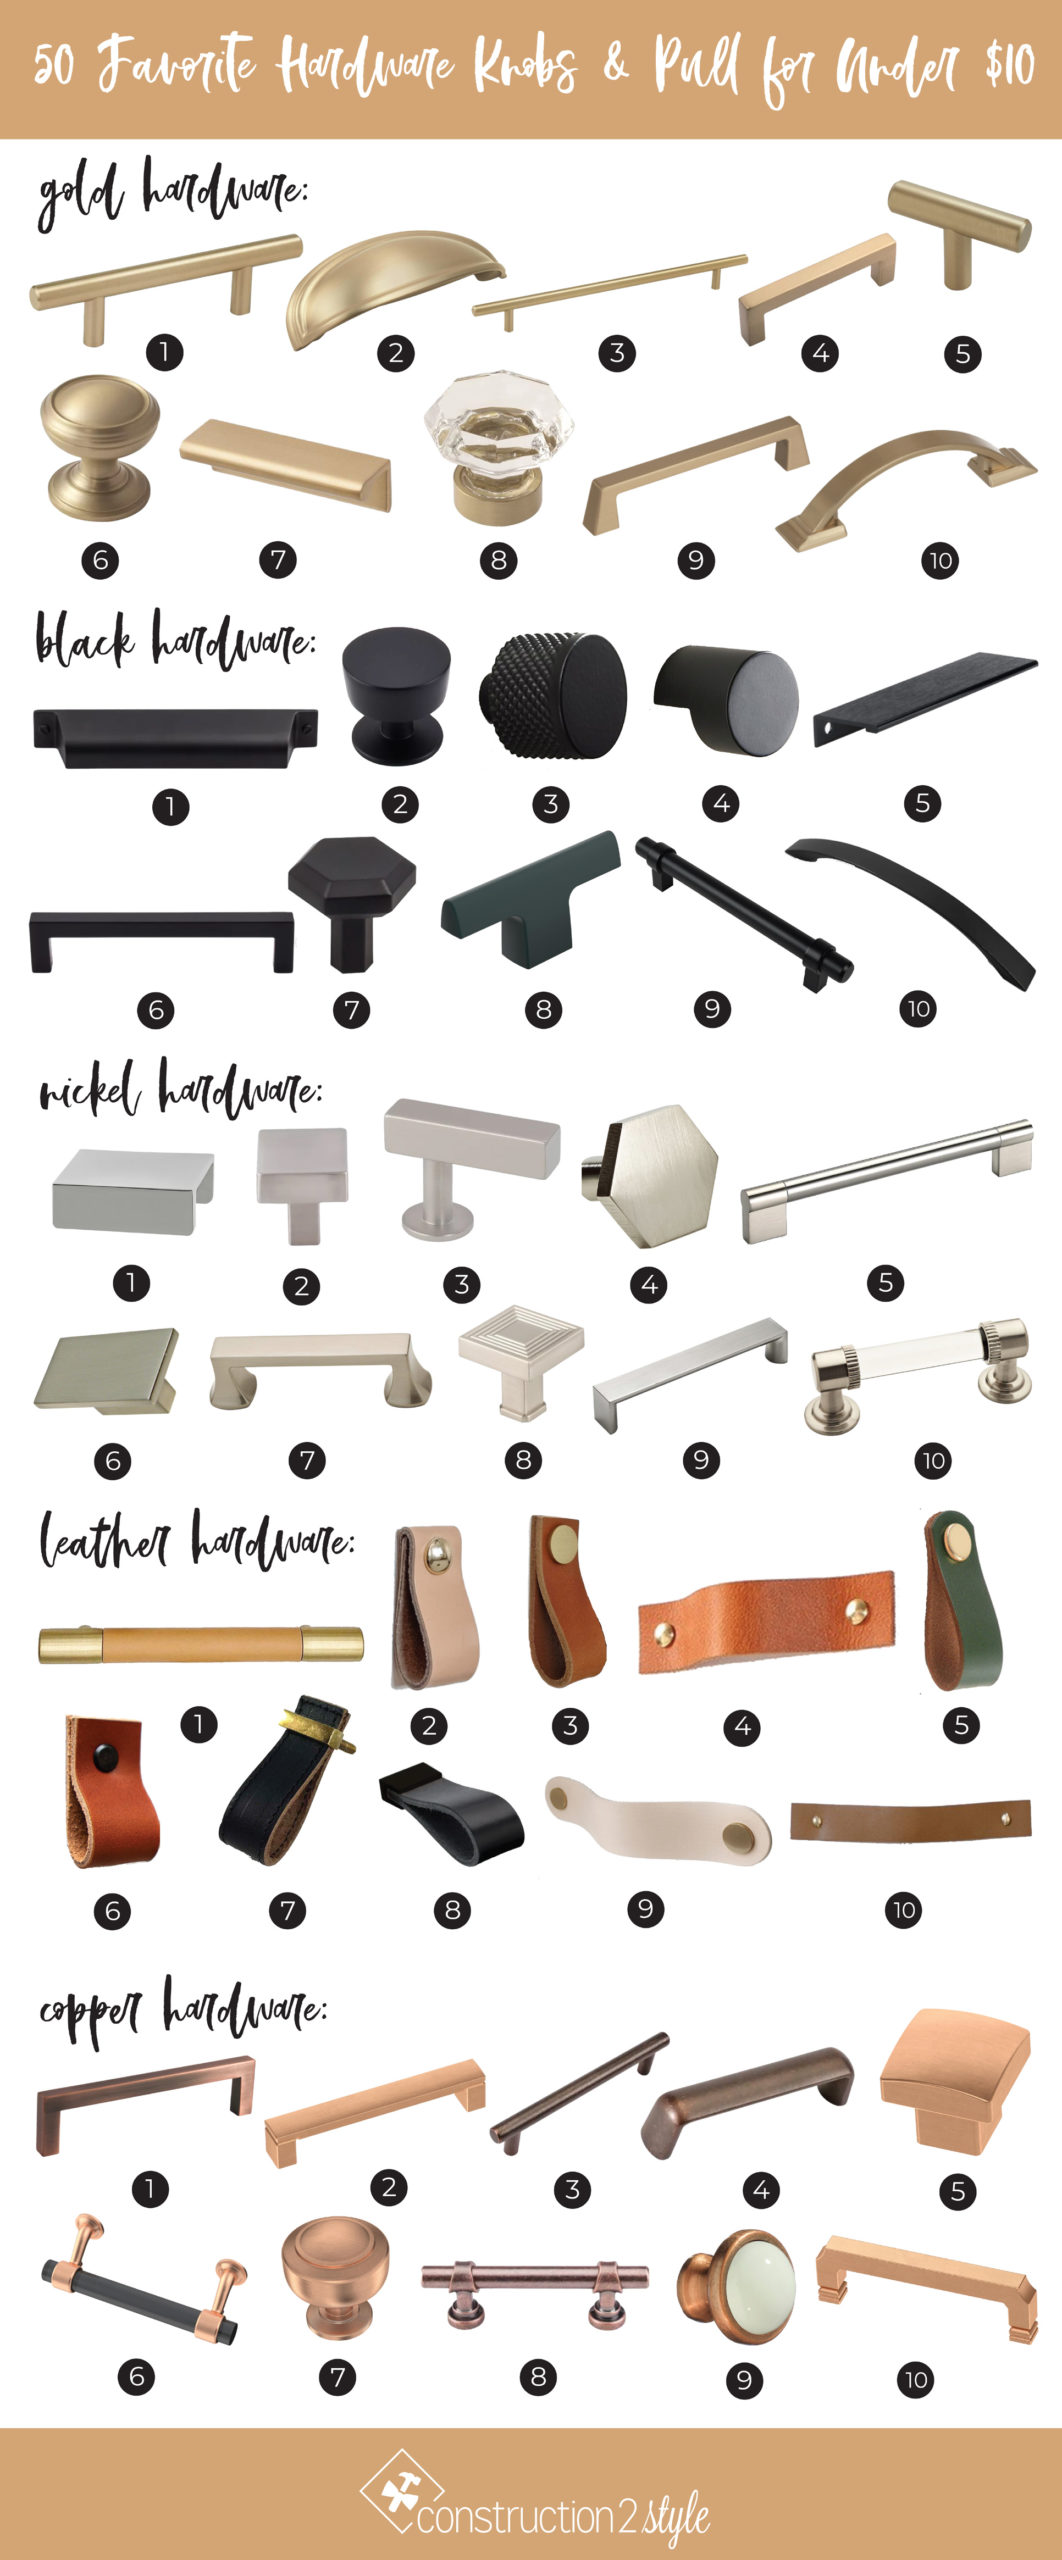 50 Favorite Hardware Knobs & Pulls for Under $10 | construction2style